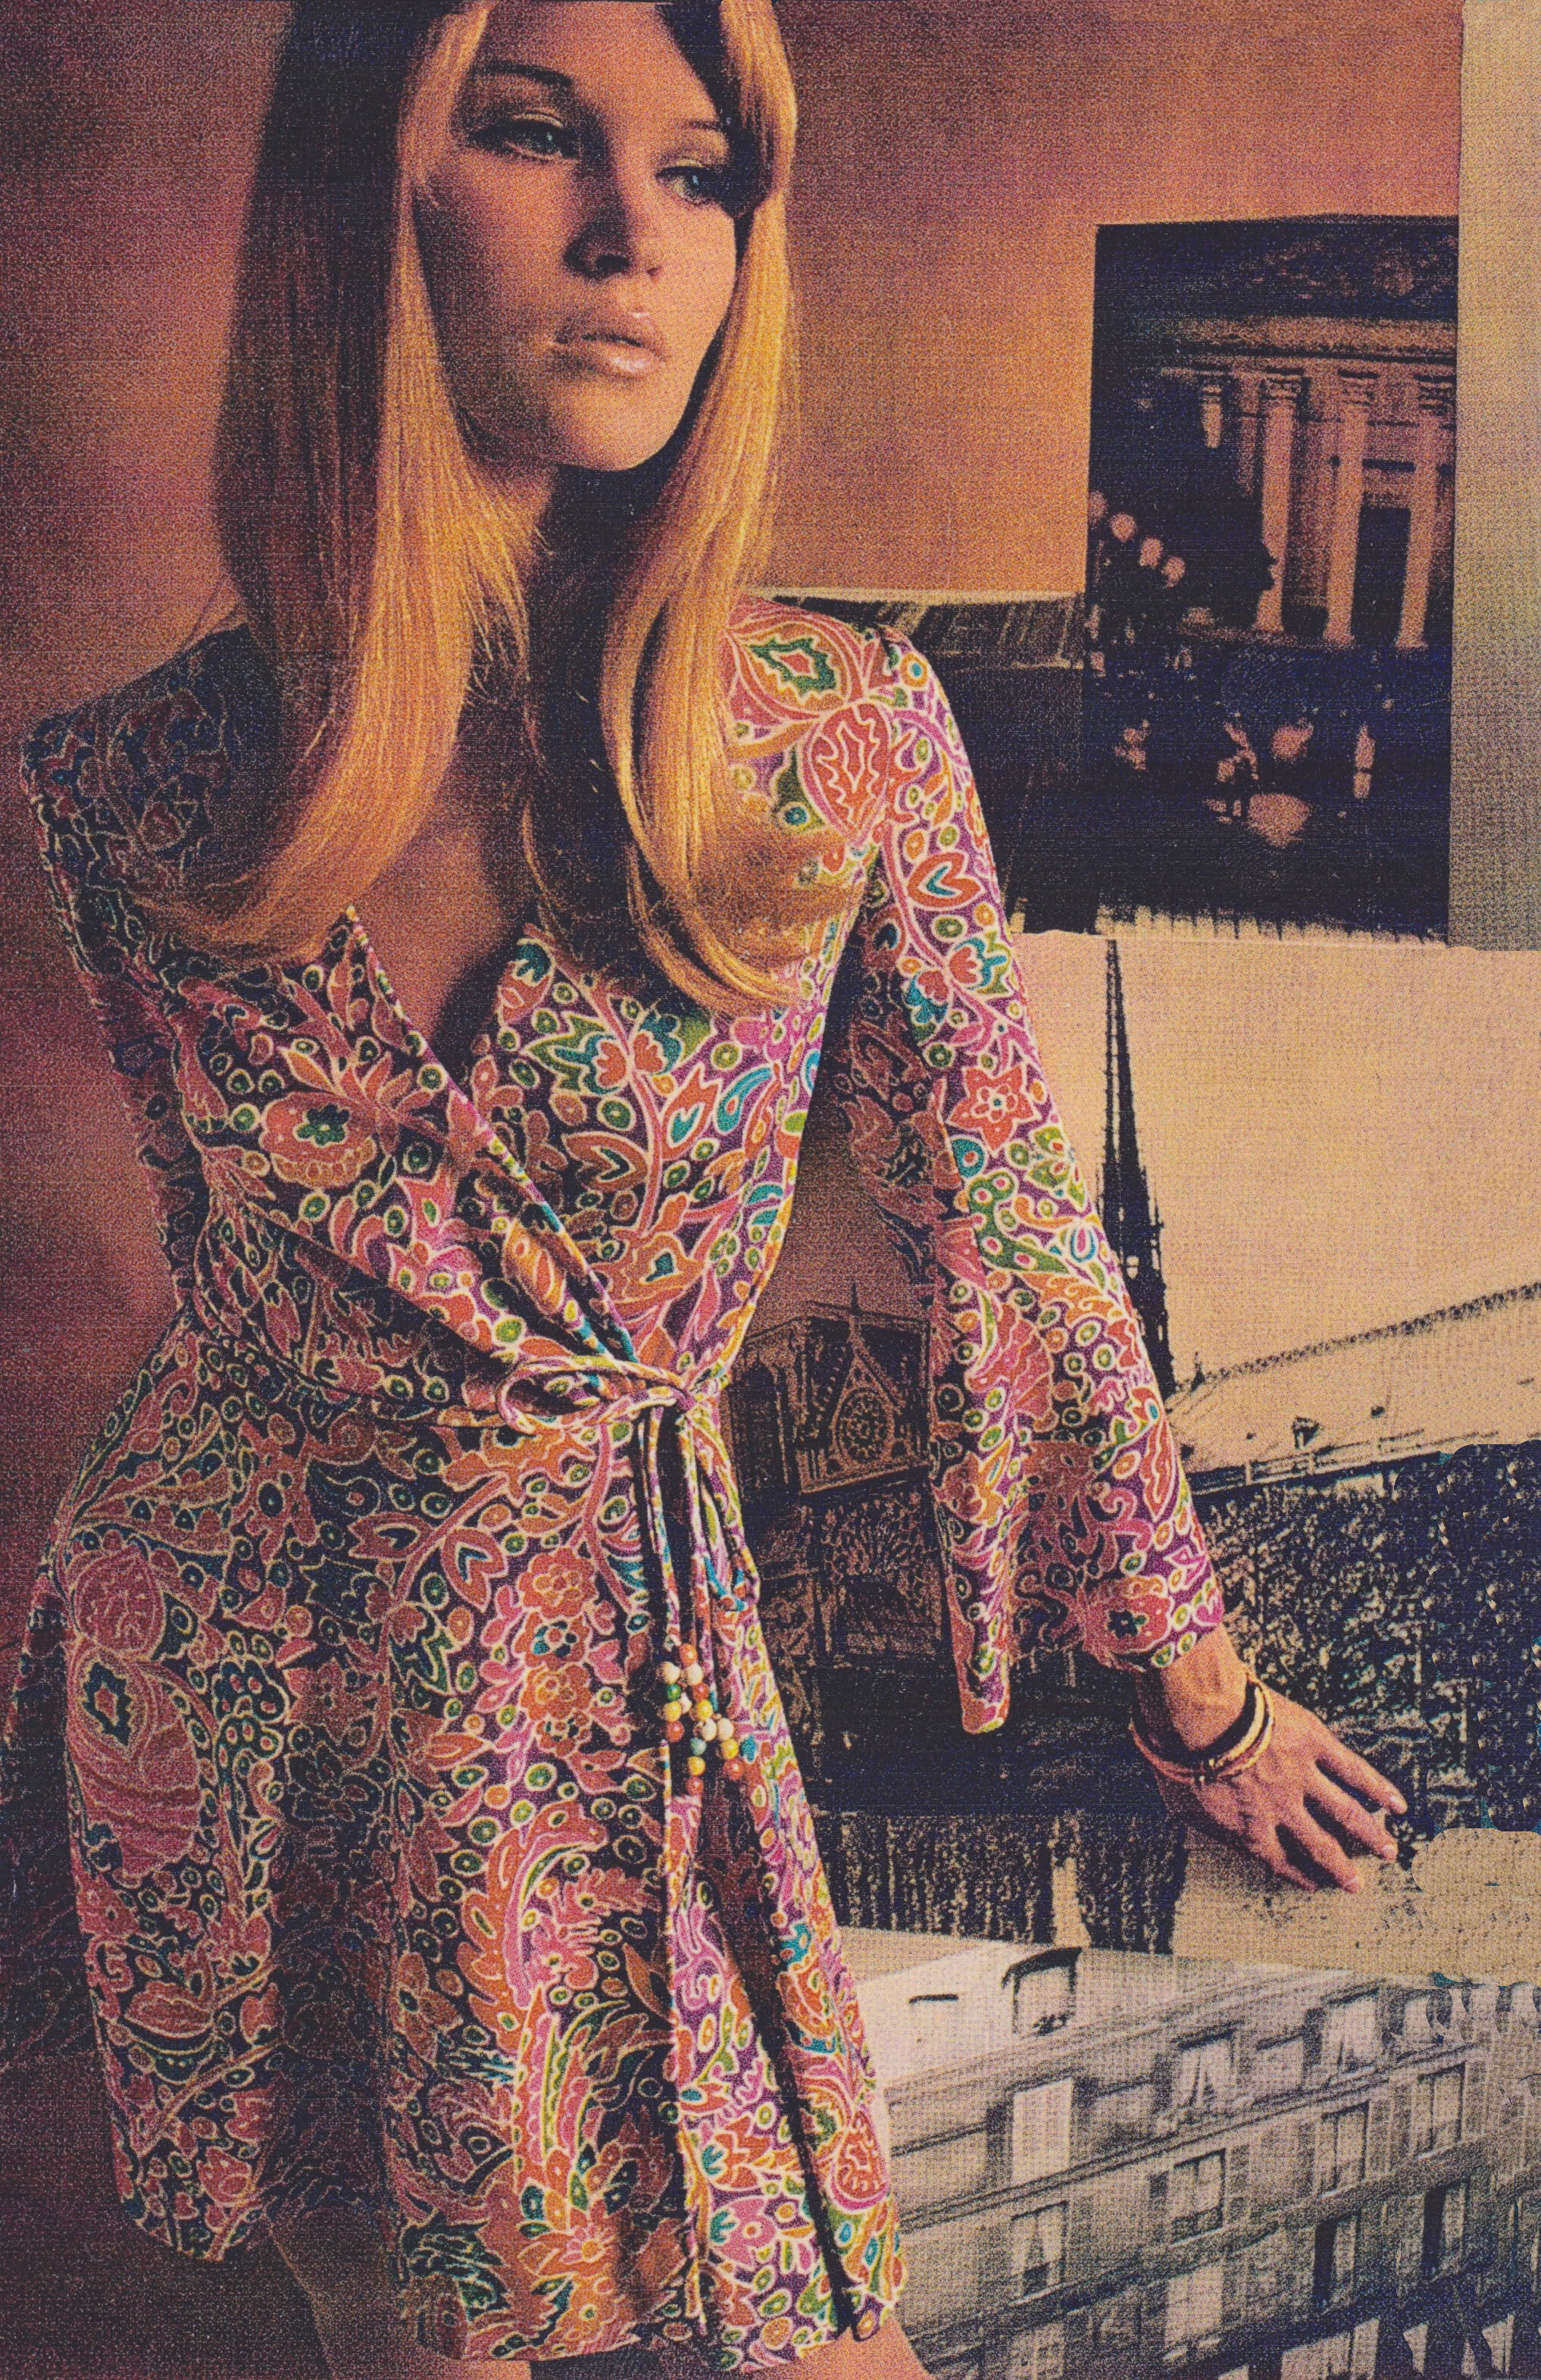 A wrap-dress designed by Fonssagrives-Tiel in 1967 and licensed to Joan Arkin, a NYC dress company. Redbook, 1967.